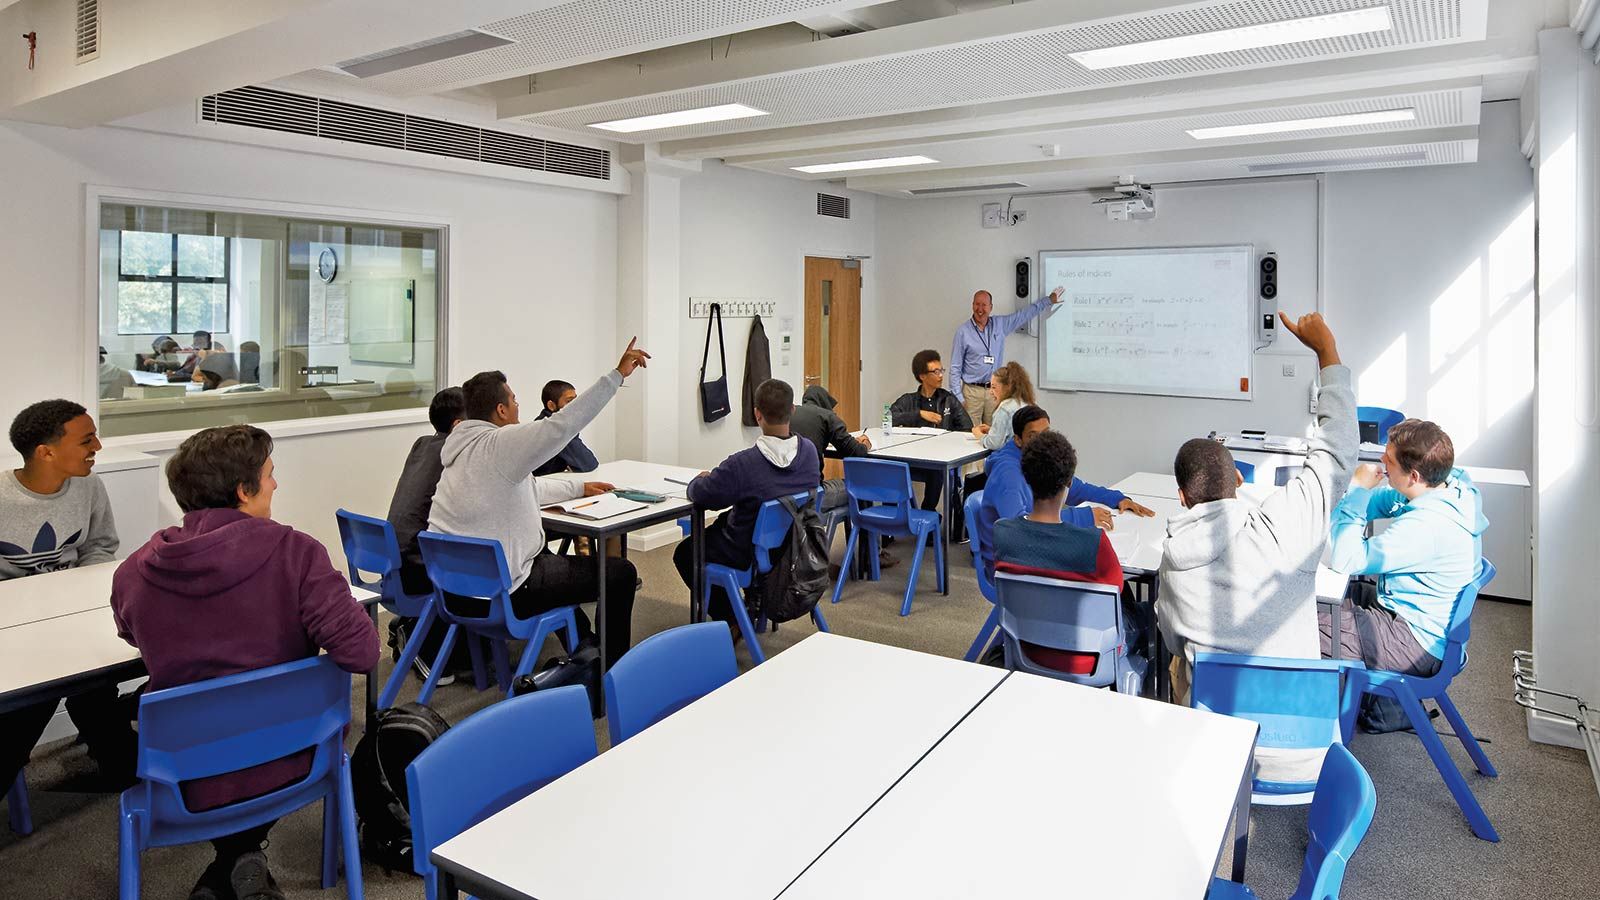 Pupils raising their hand in a class room - Mace Group